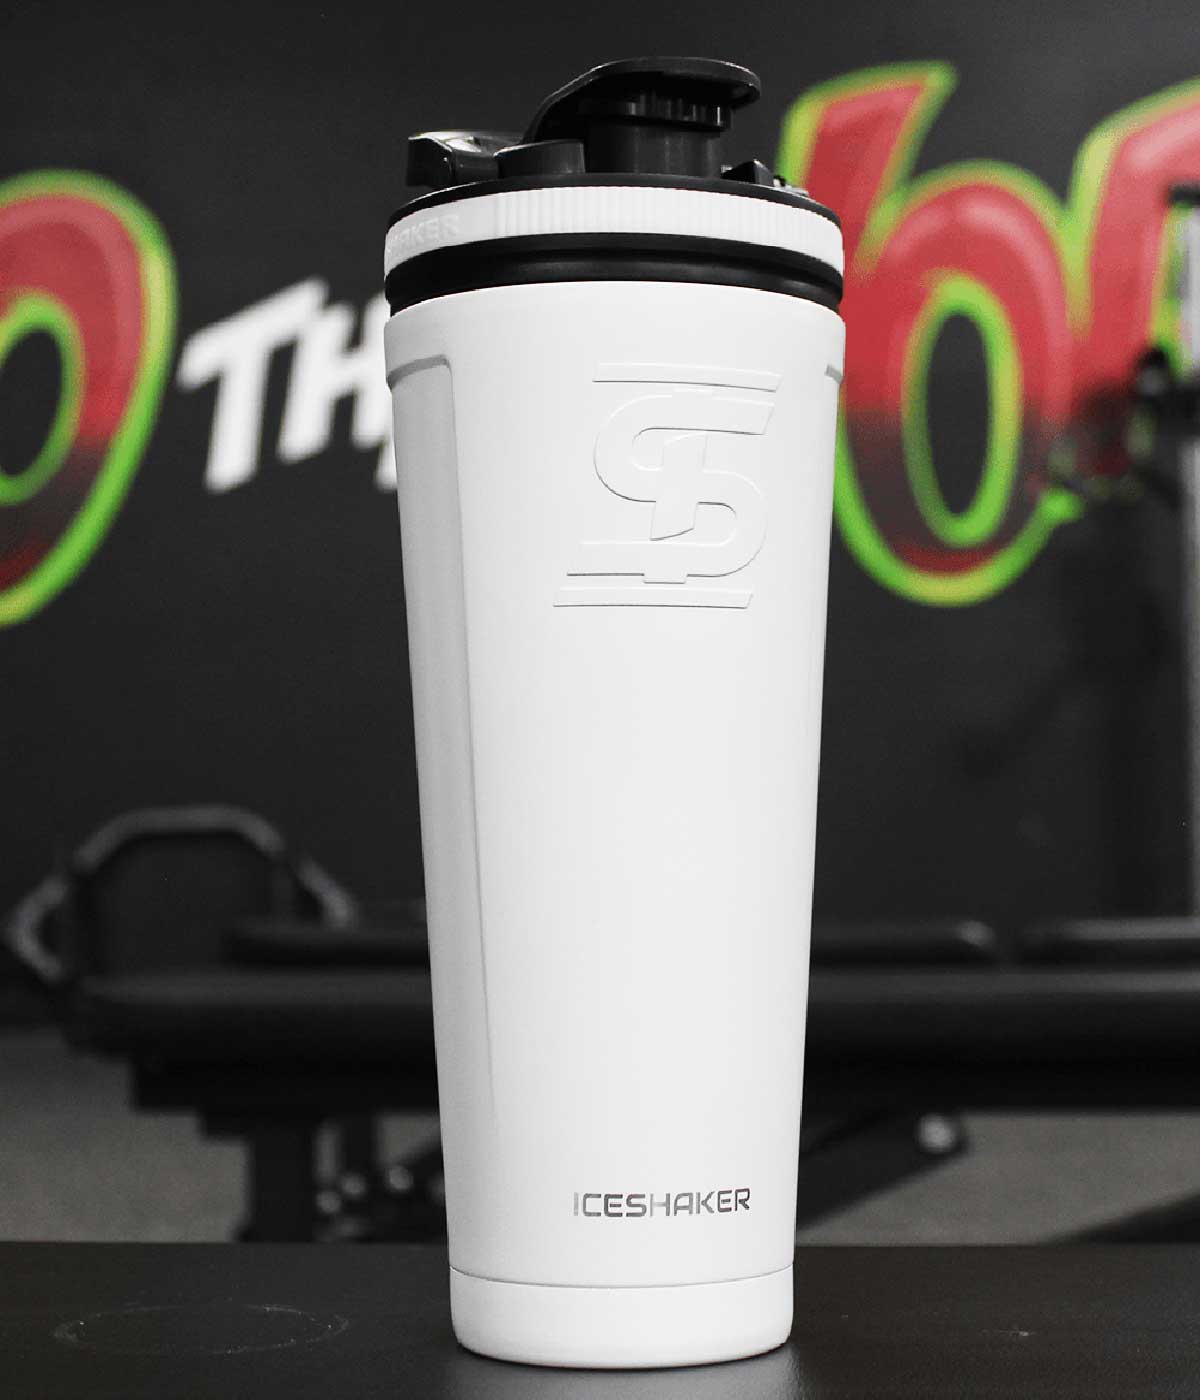 The white-colored 36oz Ice Shaker sits in a gym setting. This image shows the front-view of the bottle.